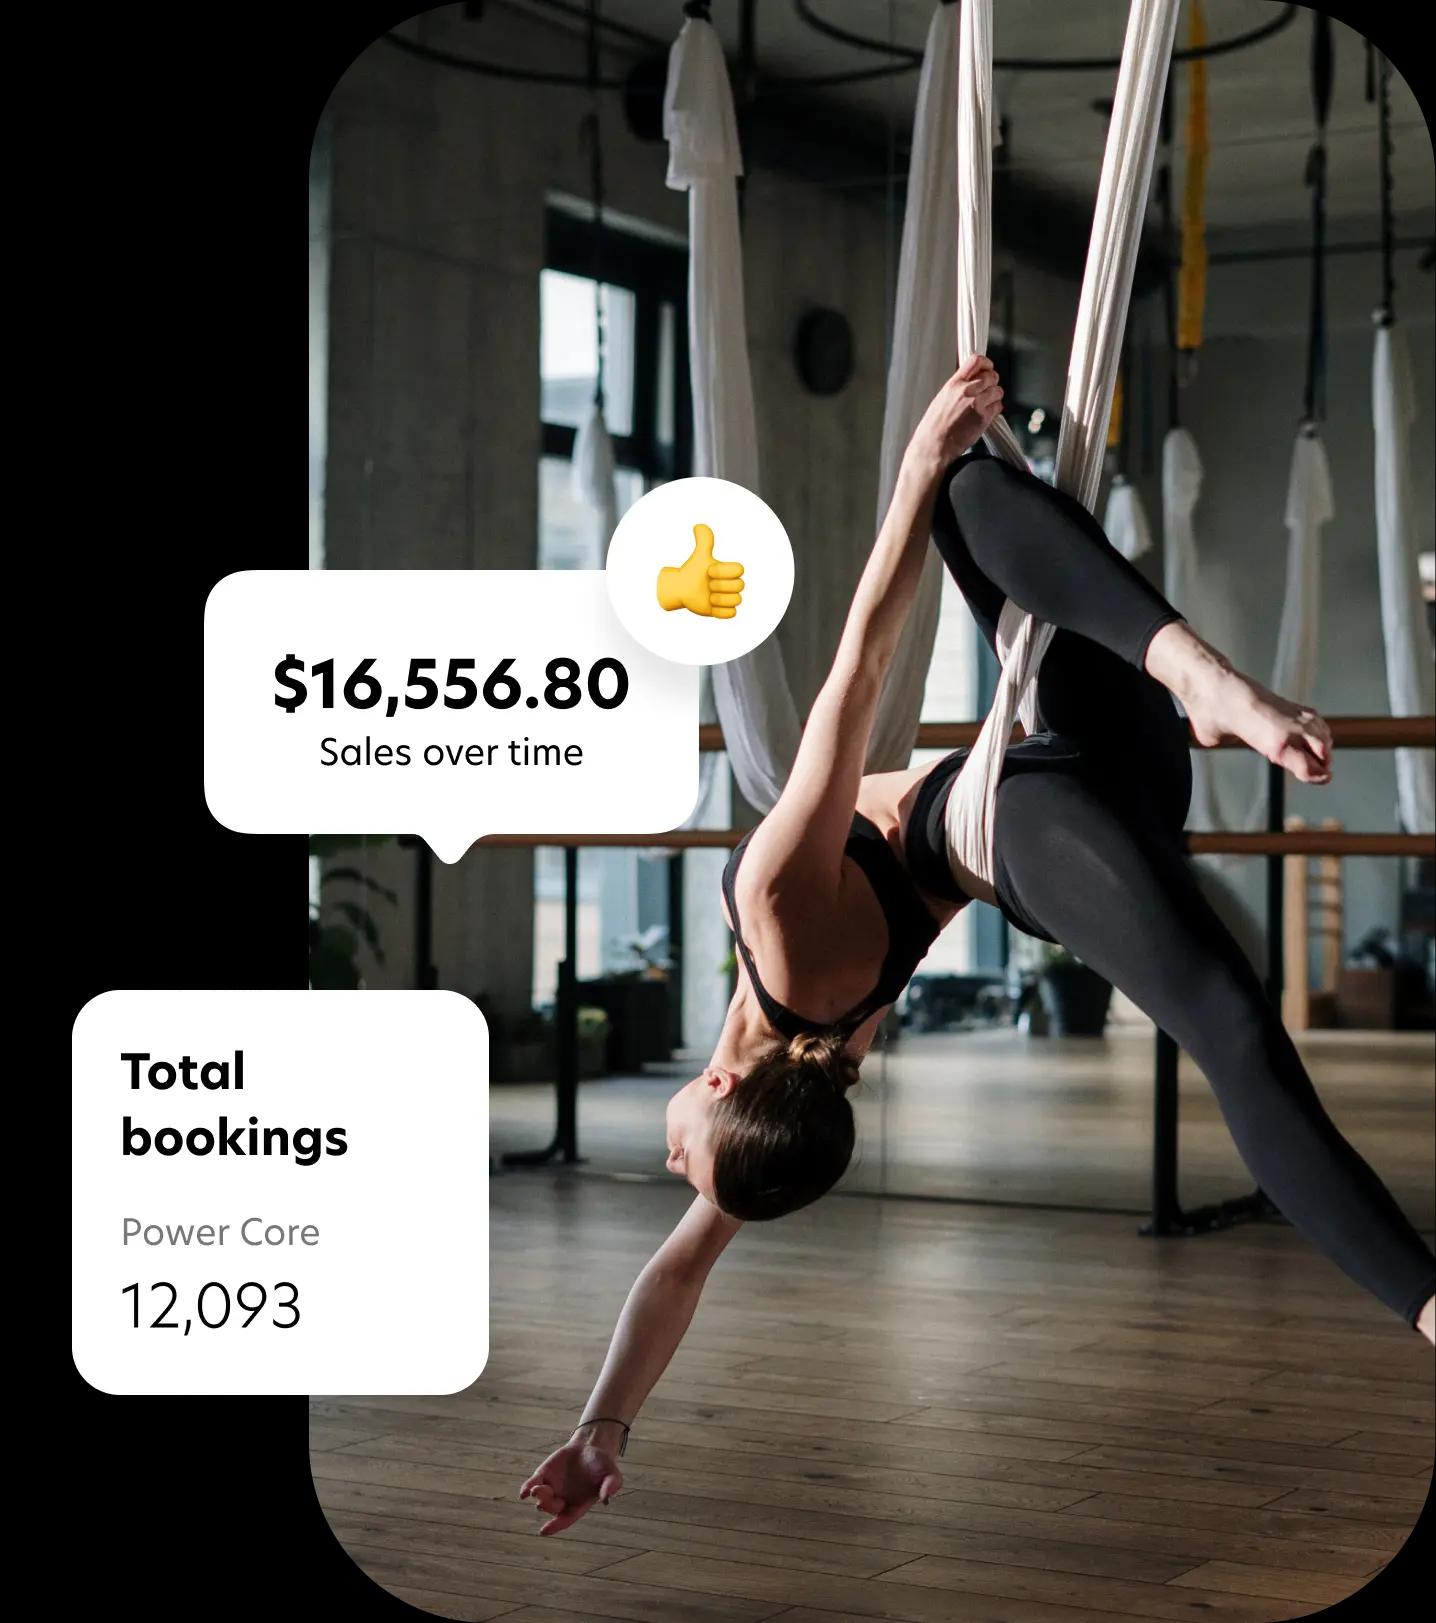 A Management Software Built Exclusively for Pilates Studios